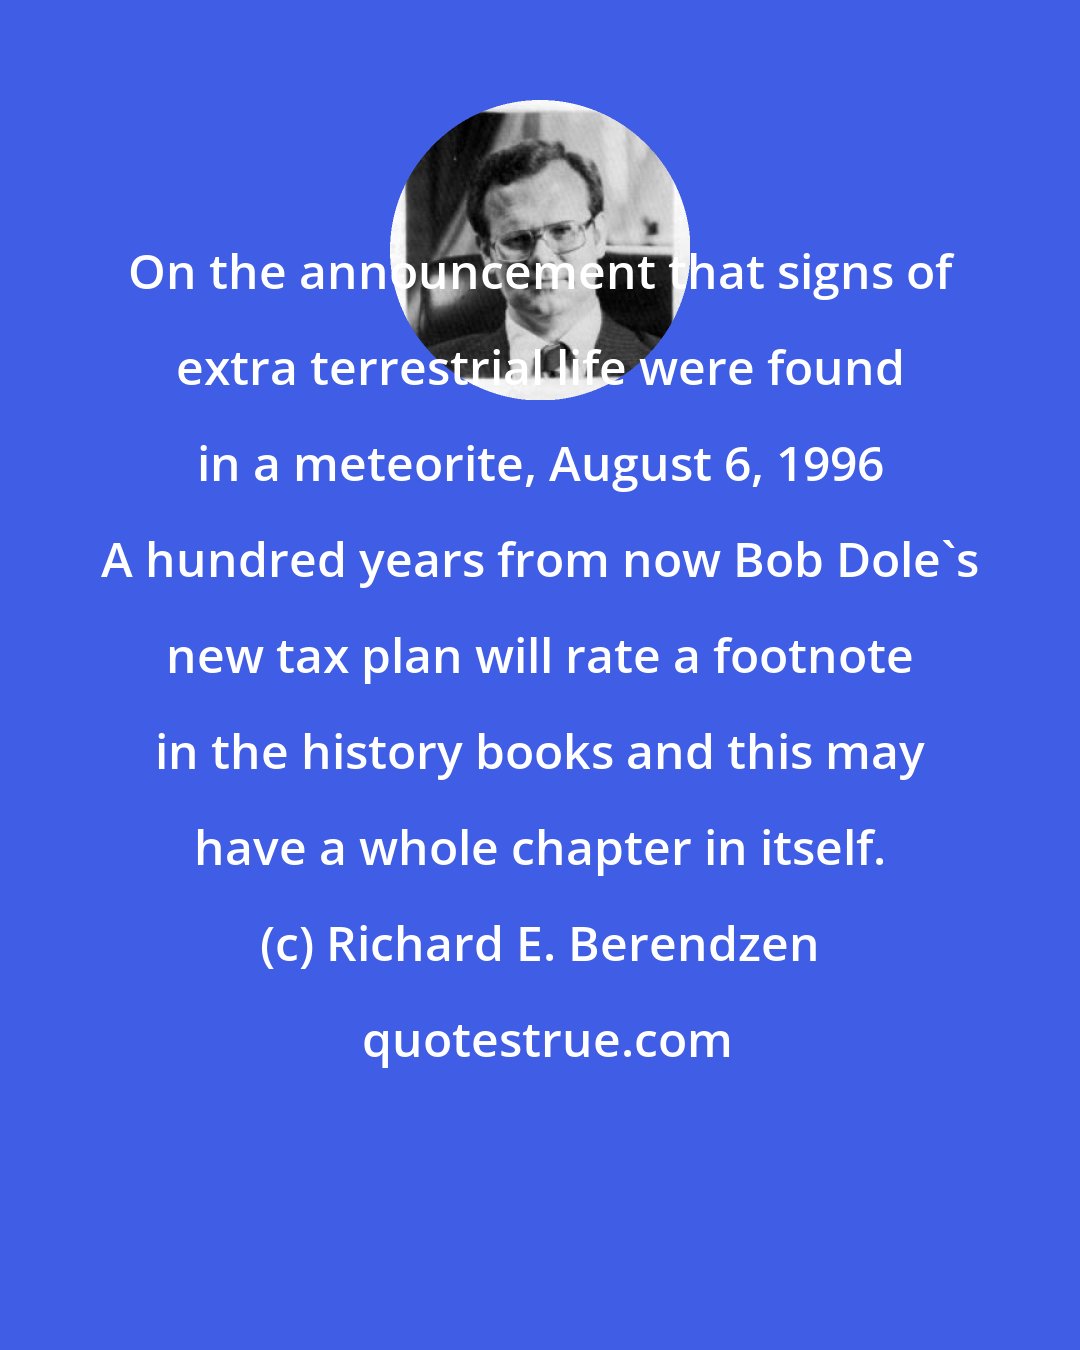 Richard E. Berendzen: On the announcement that signs of extra terrestrial life were found in a meteorite, August 6, 1996 A hundred years from now Bob Dole's new tax plan will rate a footnote in the history books and this may have a whole chapter in itself.